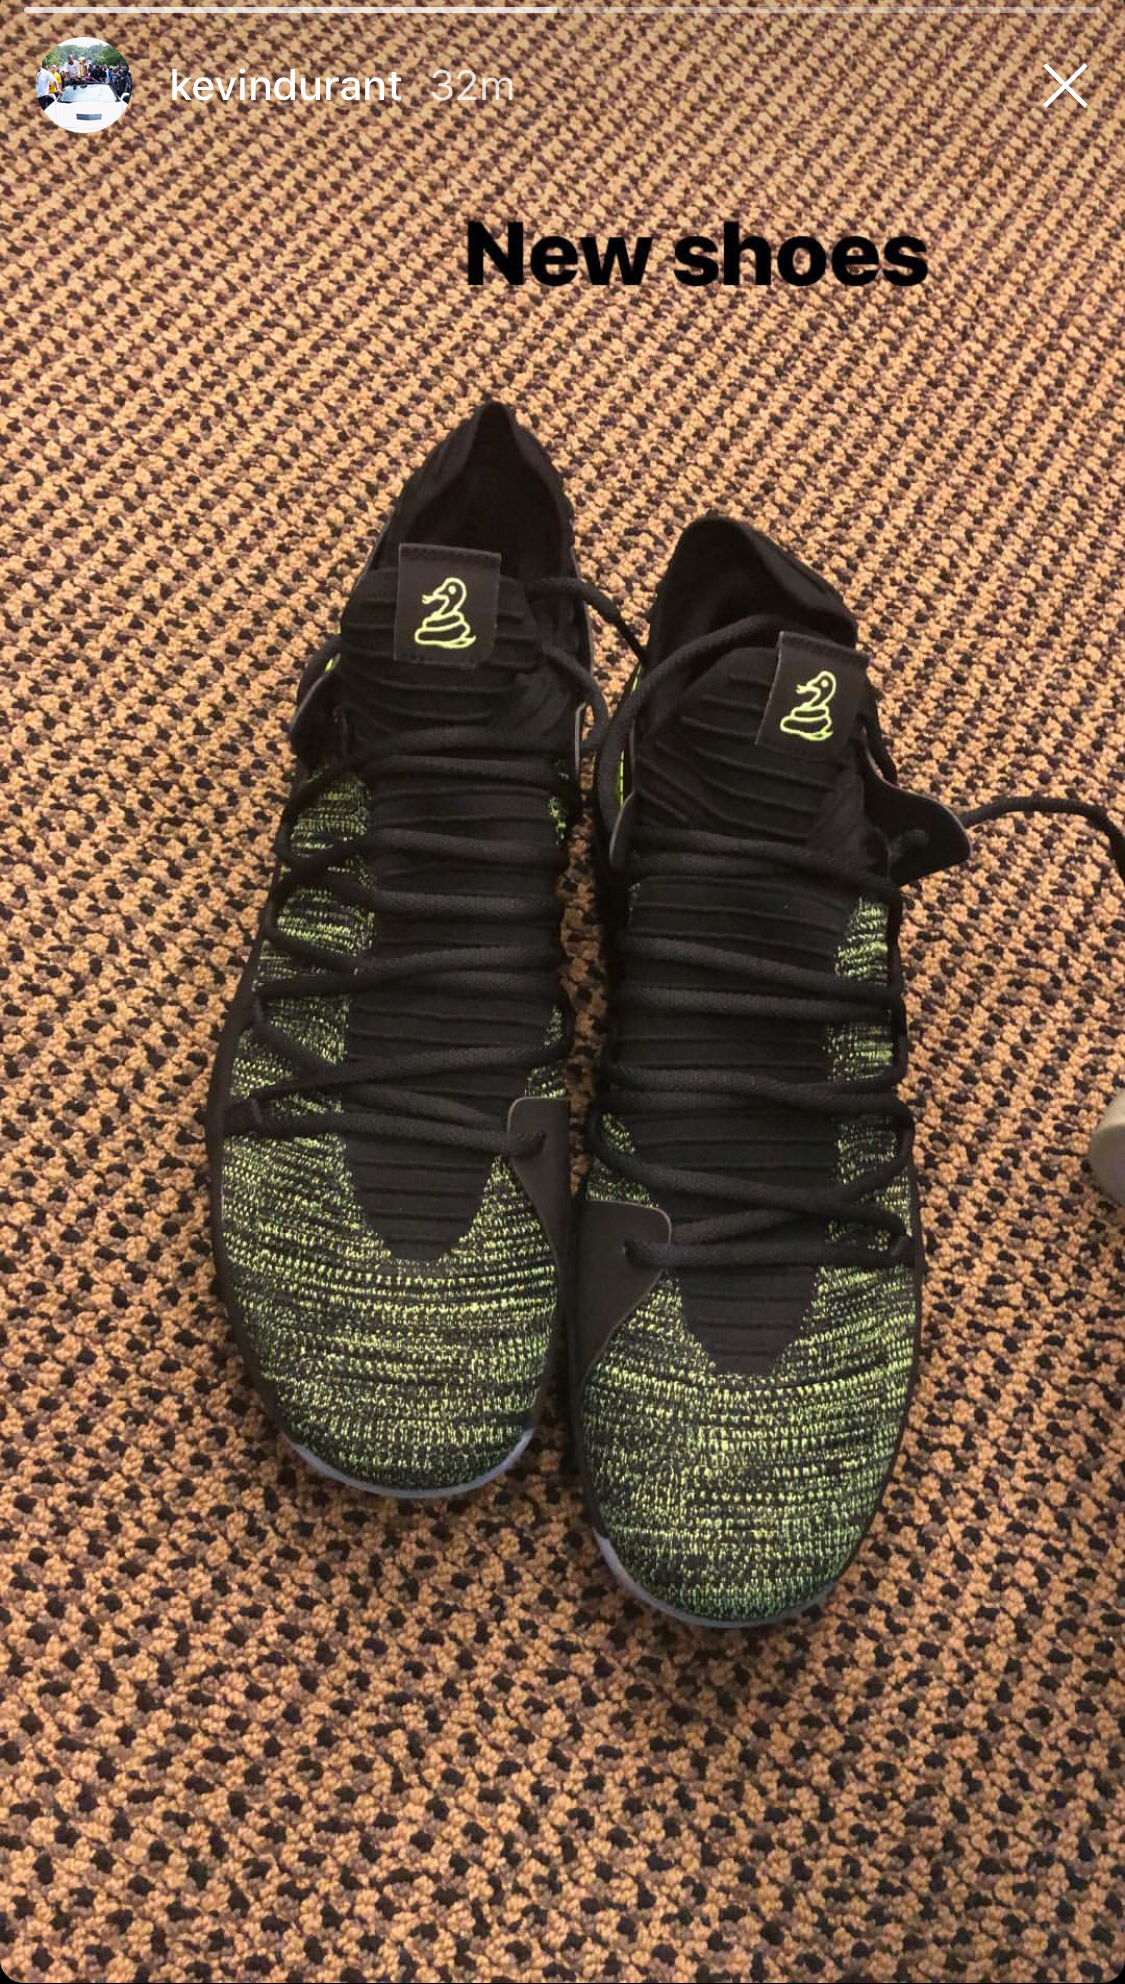 kevin durant new shoes 2018